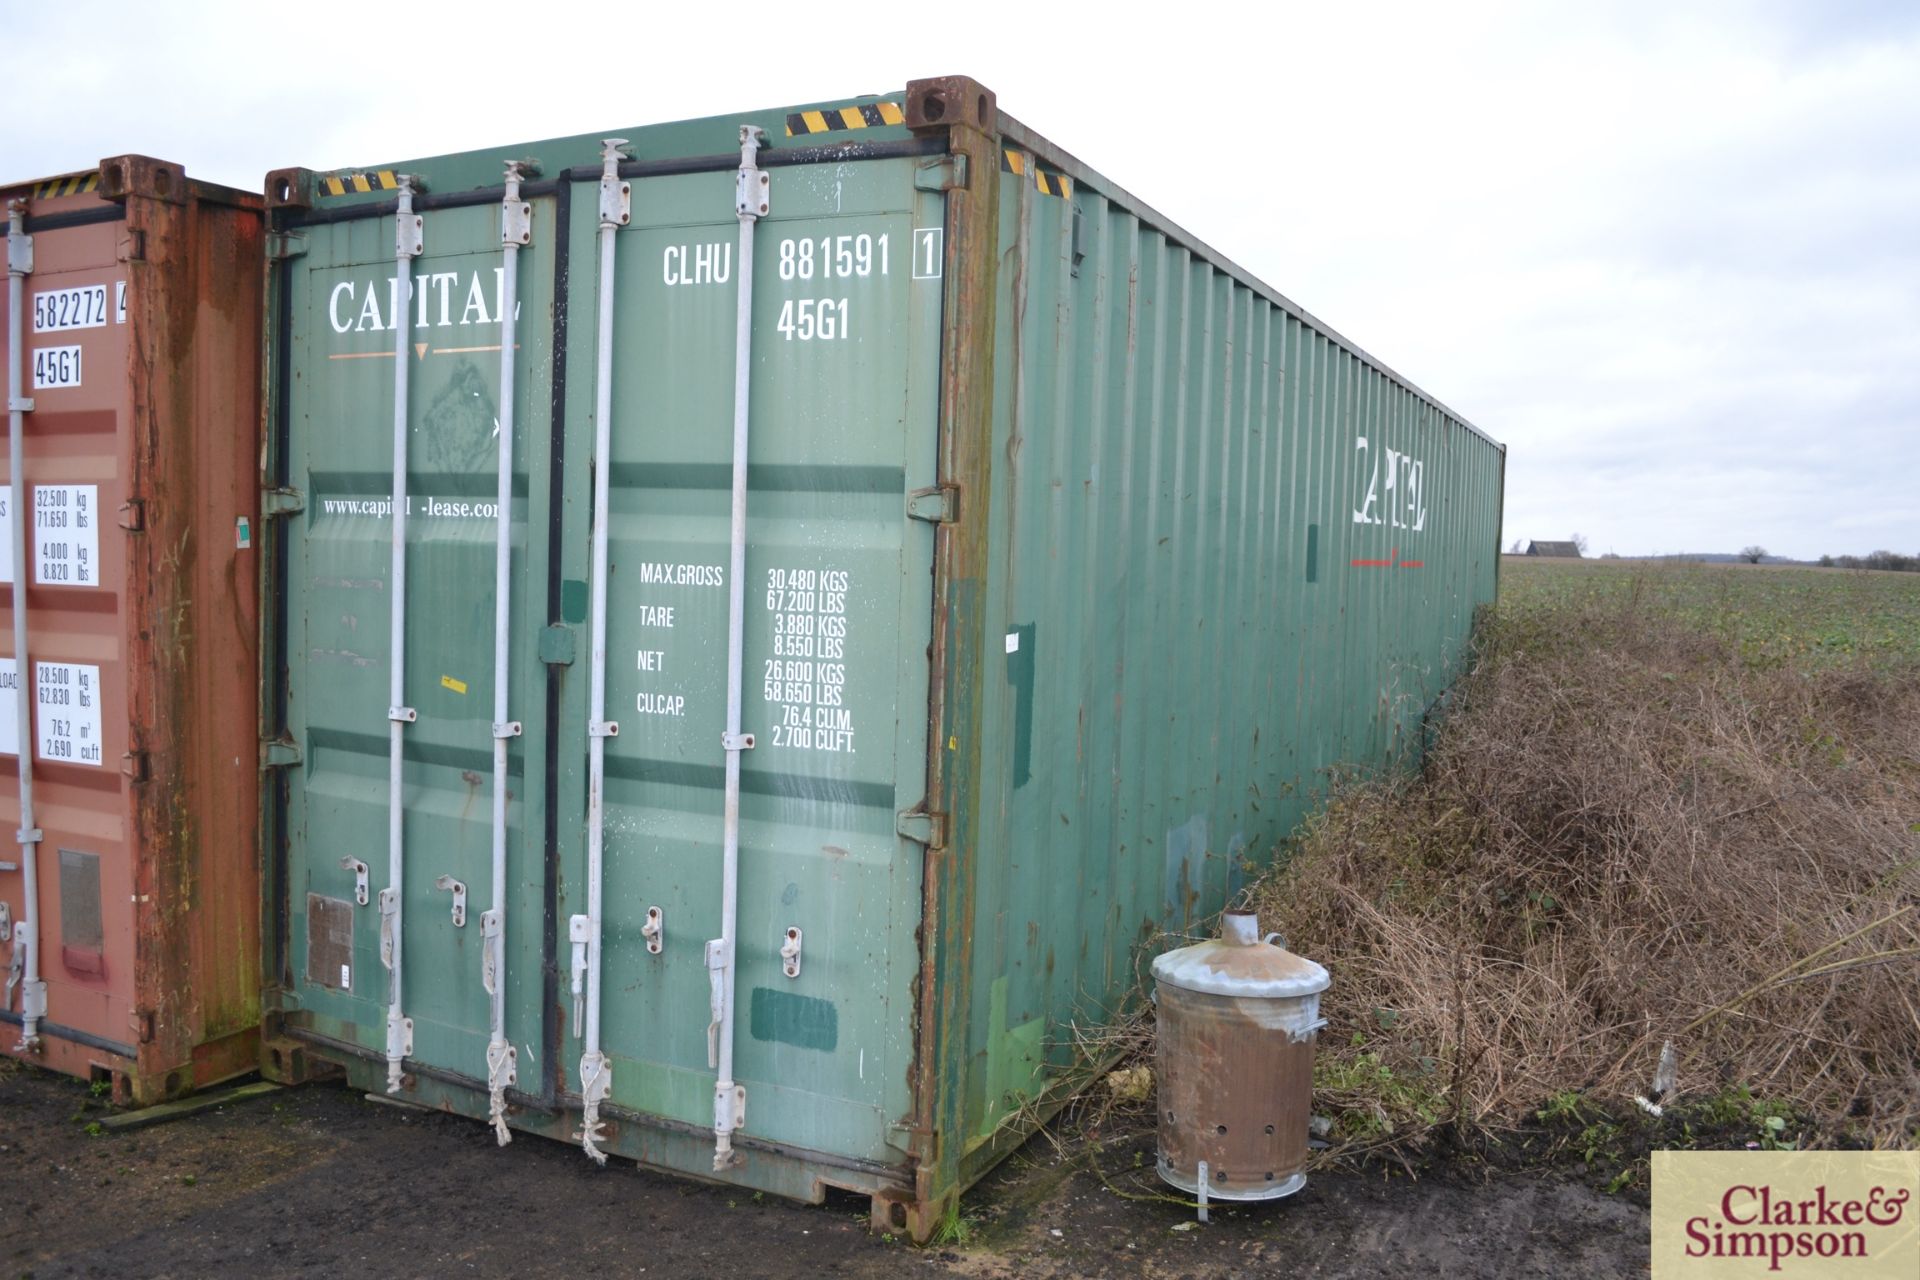 40ft shipping container. 2003. To be sold in situ and removed at purchaser's expense.